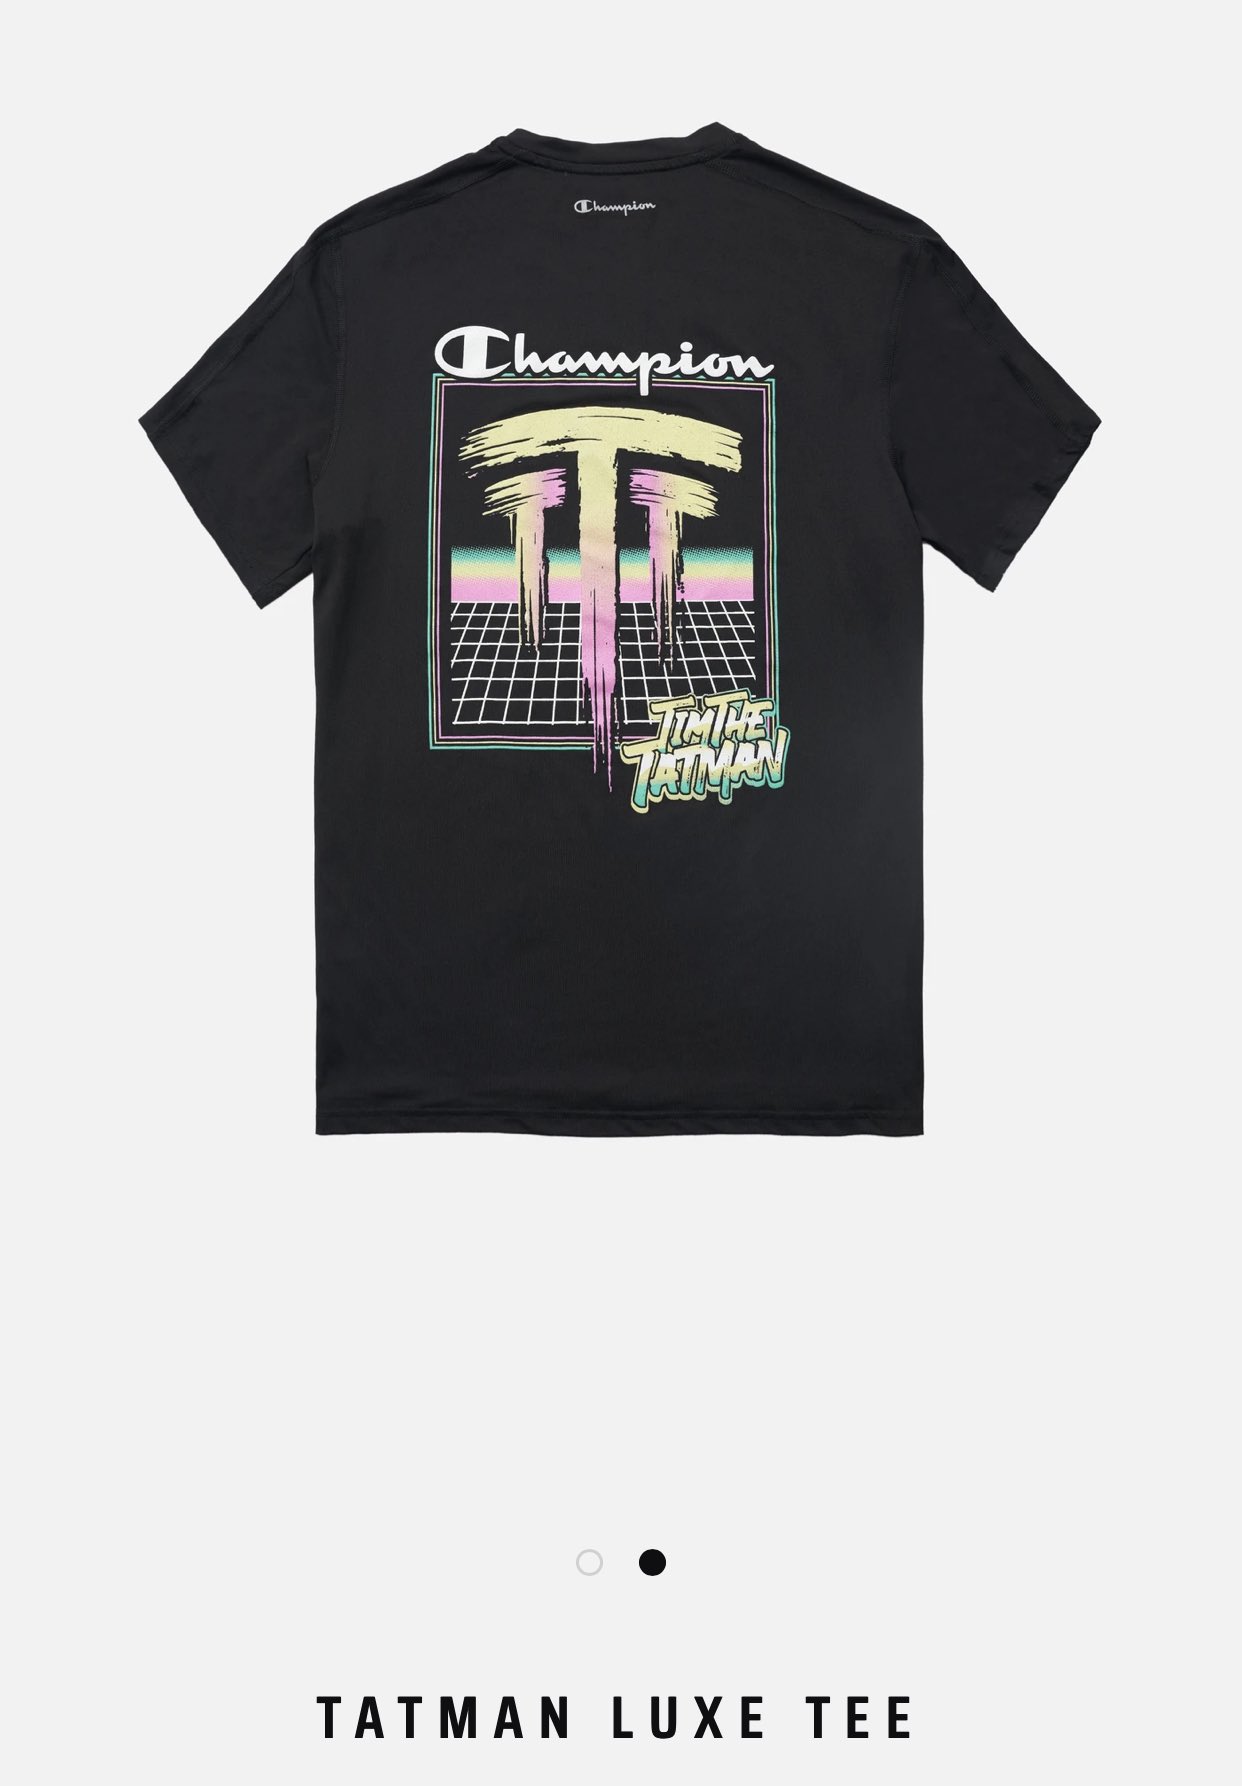 timthetatman👑 on Twitter: "the new champion x timthetatman exclusive shirt and hoodie turned out incredible... there is a limited number of these so be to get them before they are gone!